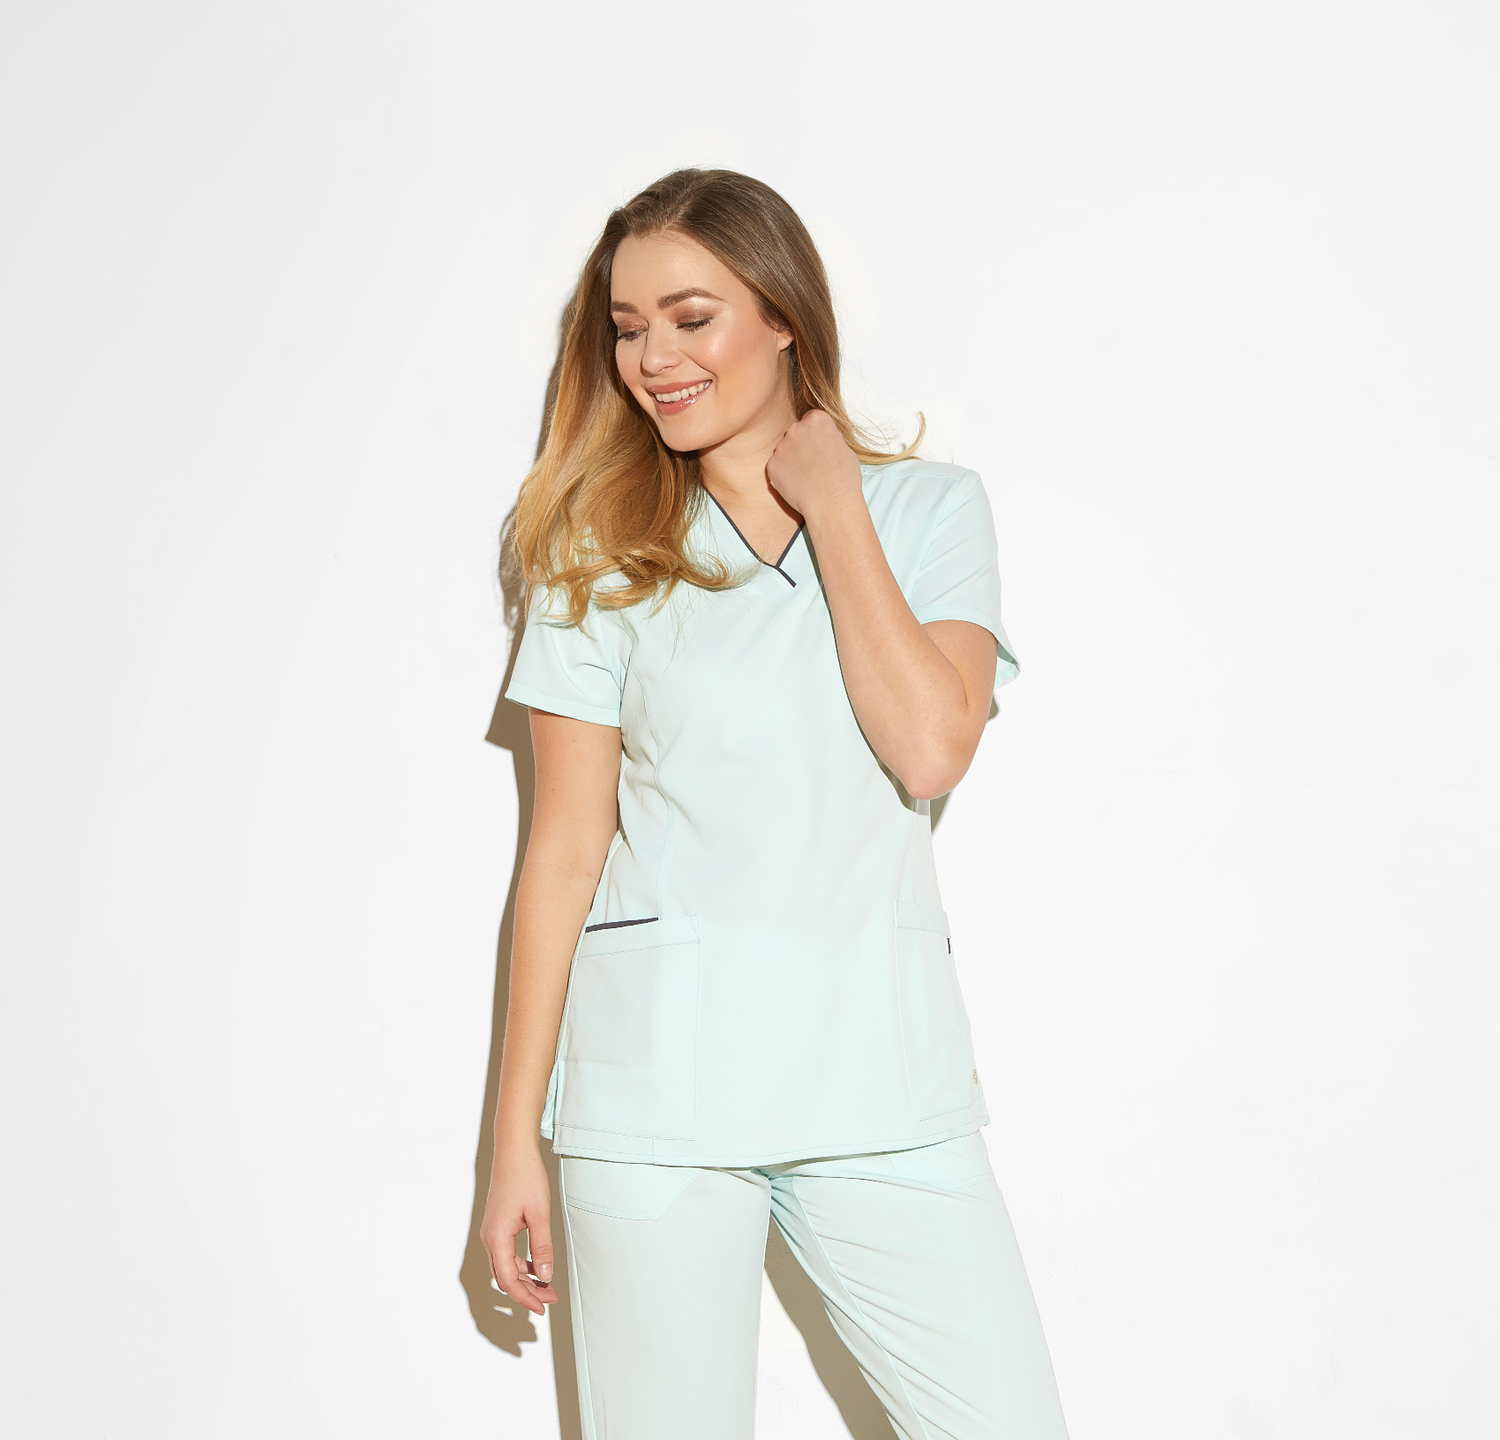 5 Reasons Why Scrubs Are Essential in the Medical Field